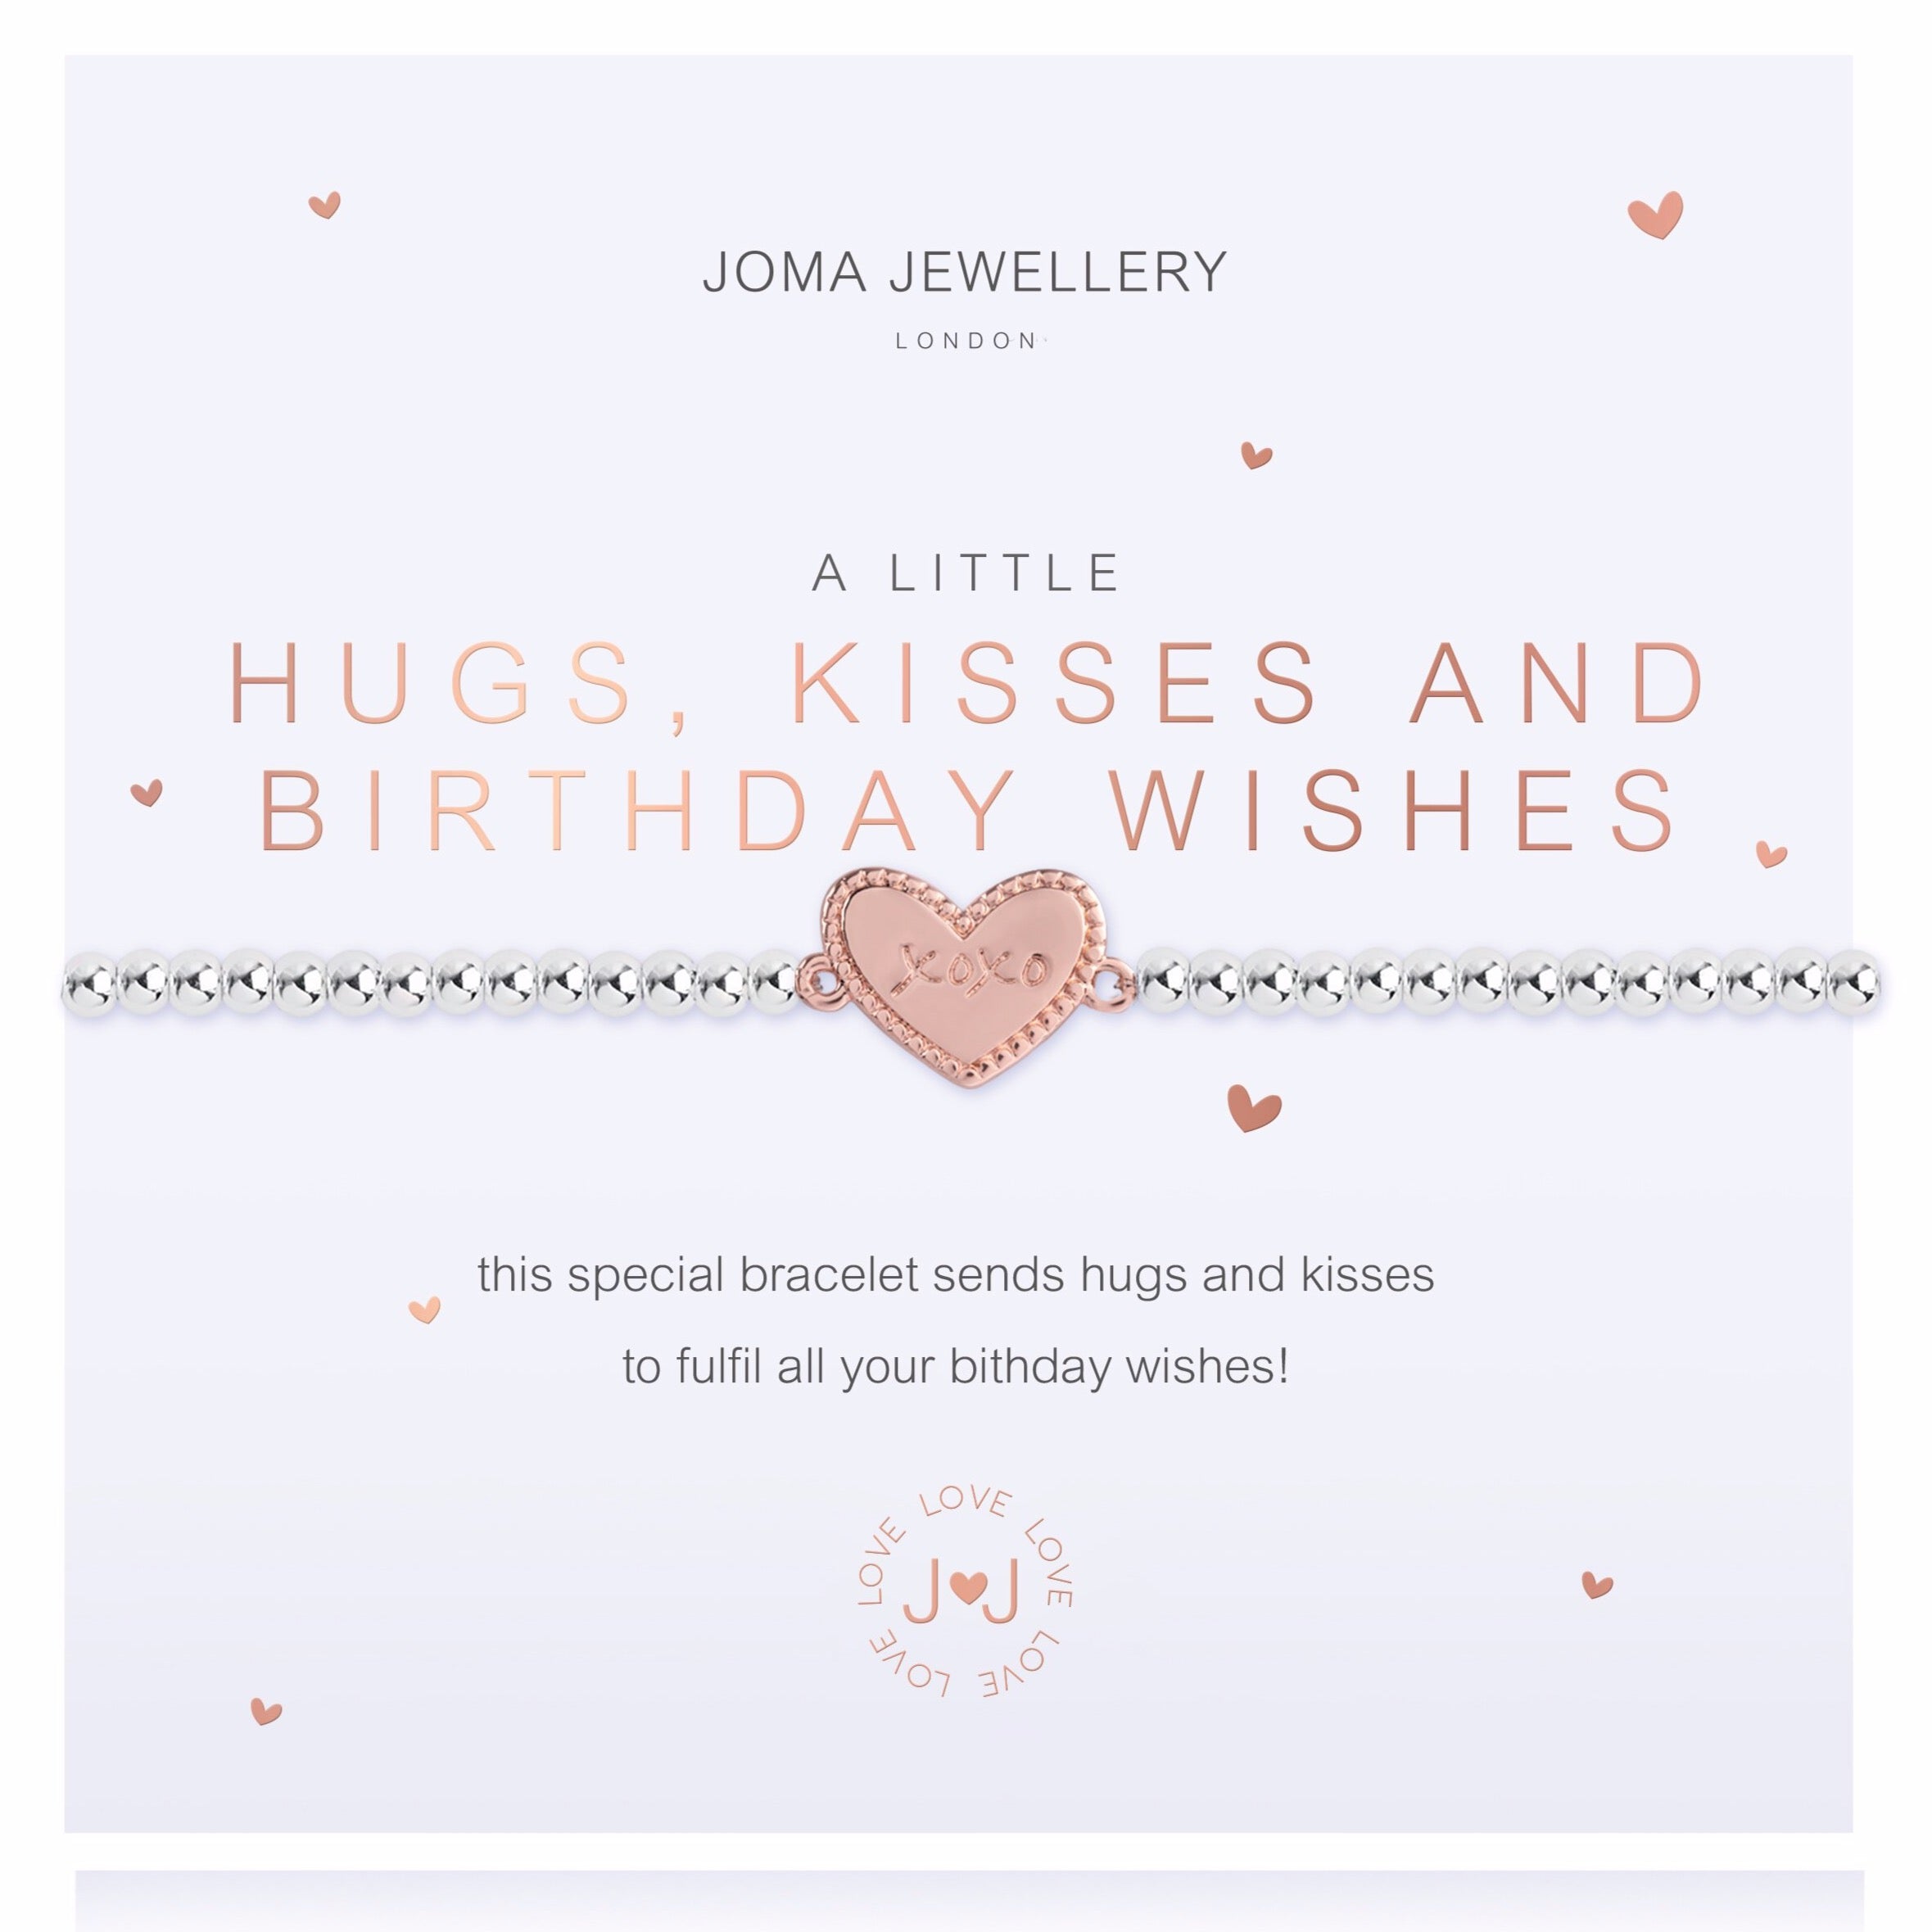 Joma Jewellery A Little Hugs, Kisses and Birthday Wishes Bracelet |More Than Just A Gift